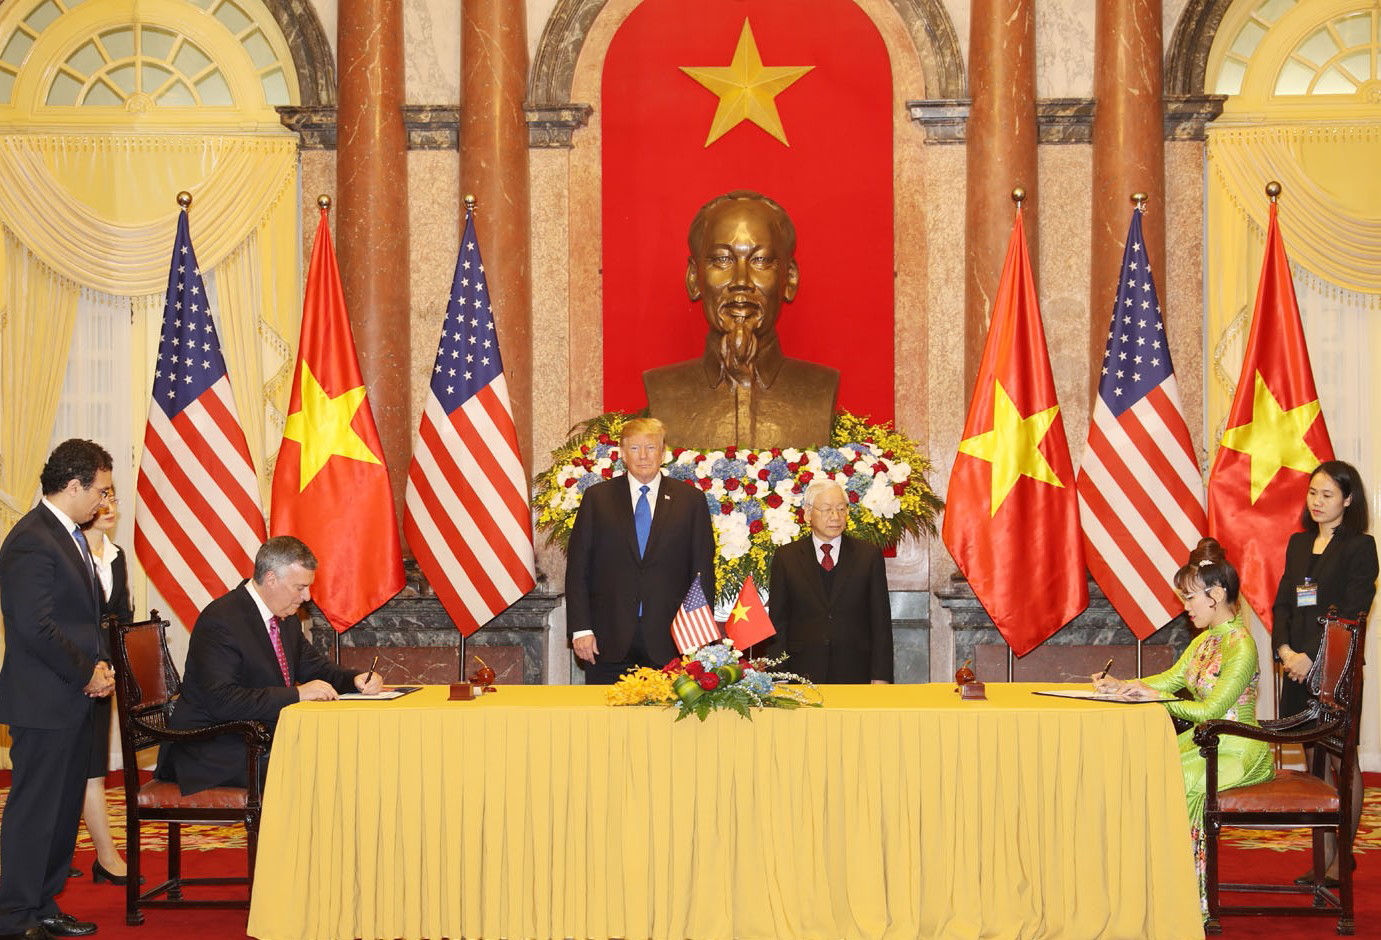 Vietjet President and CEO Nguyen Thi Phuong Thao and Boeing Commercial Airplanes President & CEO Kevin McAllister co-signed the airplane purchase deal, with Vietnam Communist Party General Secretary and President Nguyen Phu Trong and United States President Donald Trump as witnesses. Click to enlarge.